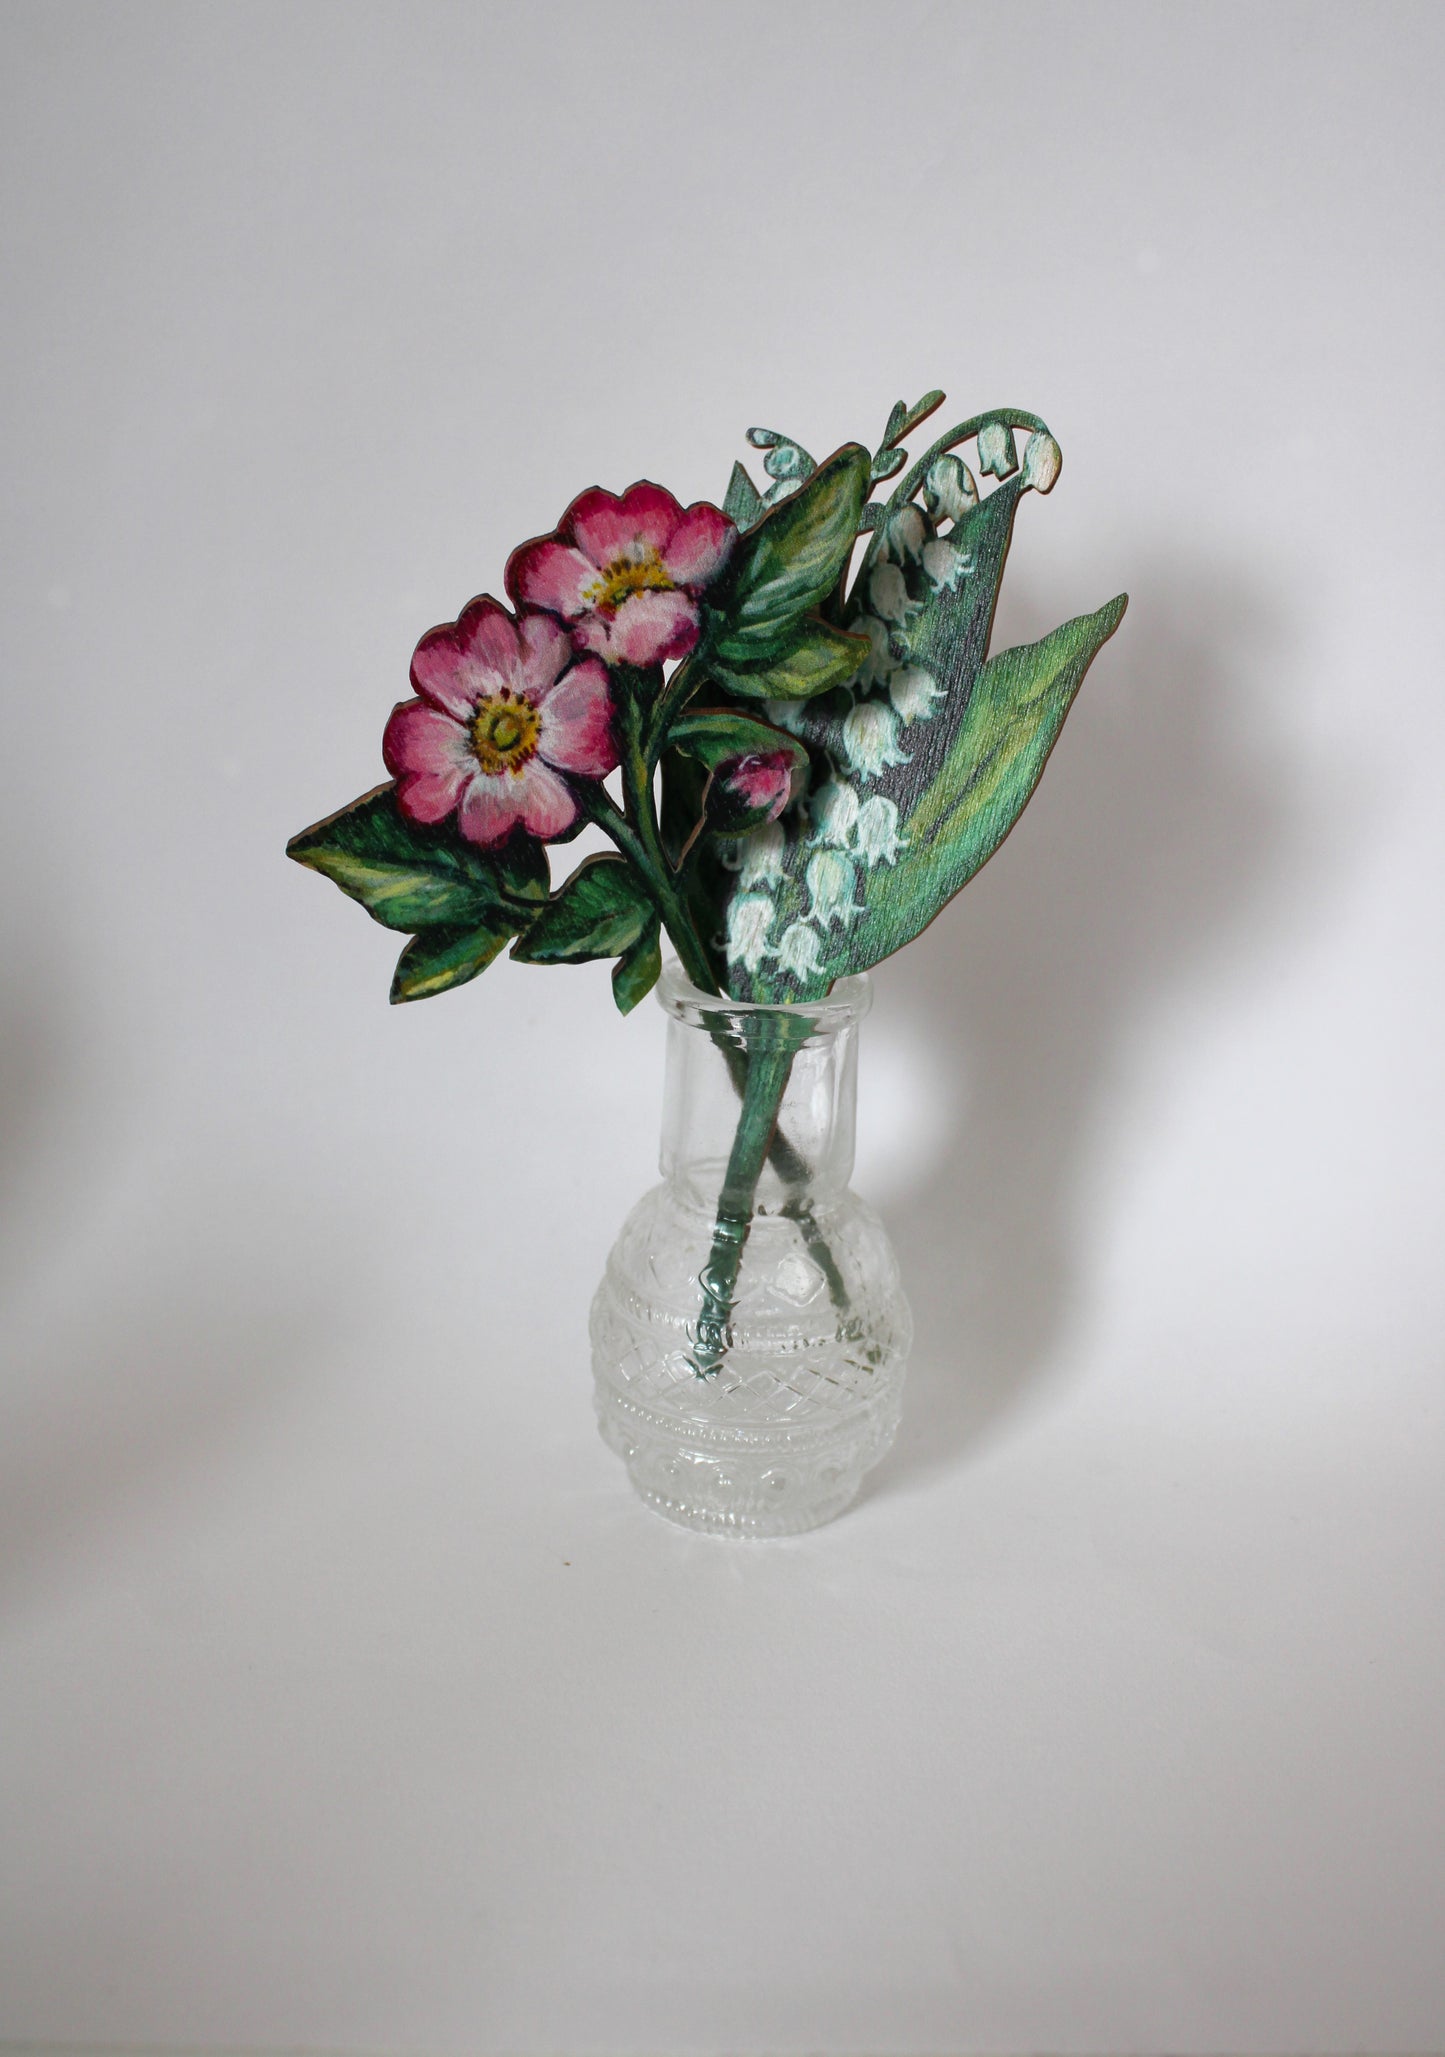 Spring Flowers in glass bud vase ~ Small Wooden  Floral Stems Dog Rose and Lily of the Valley